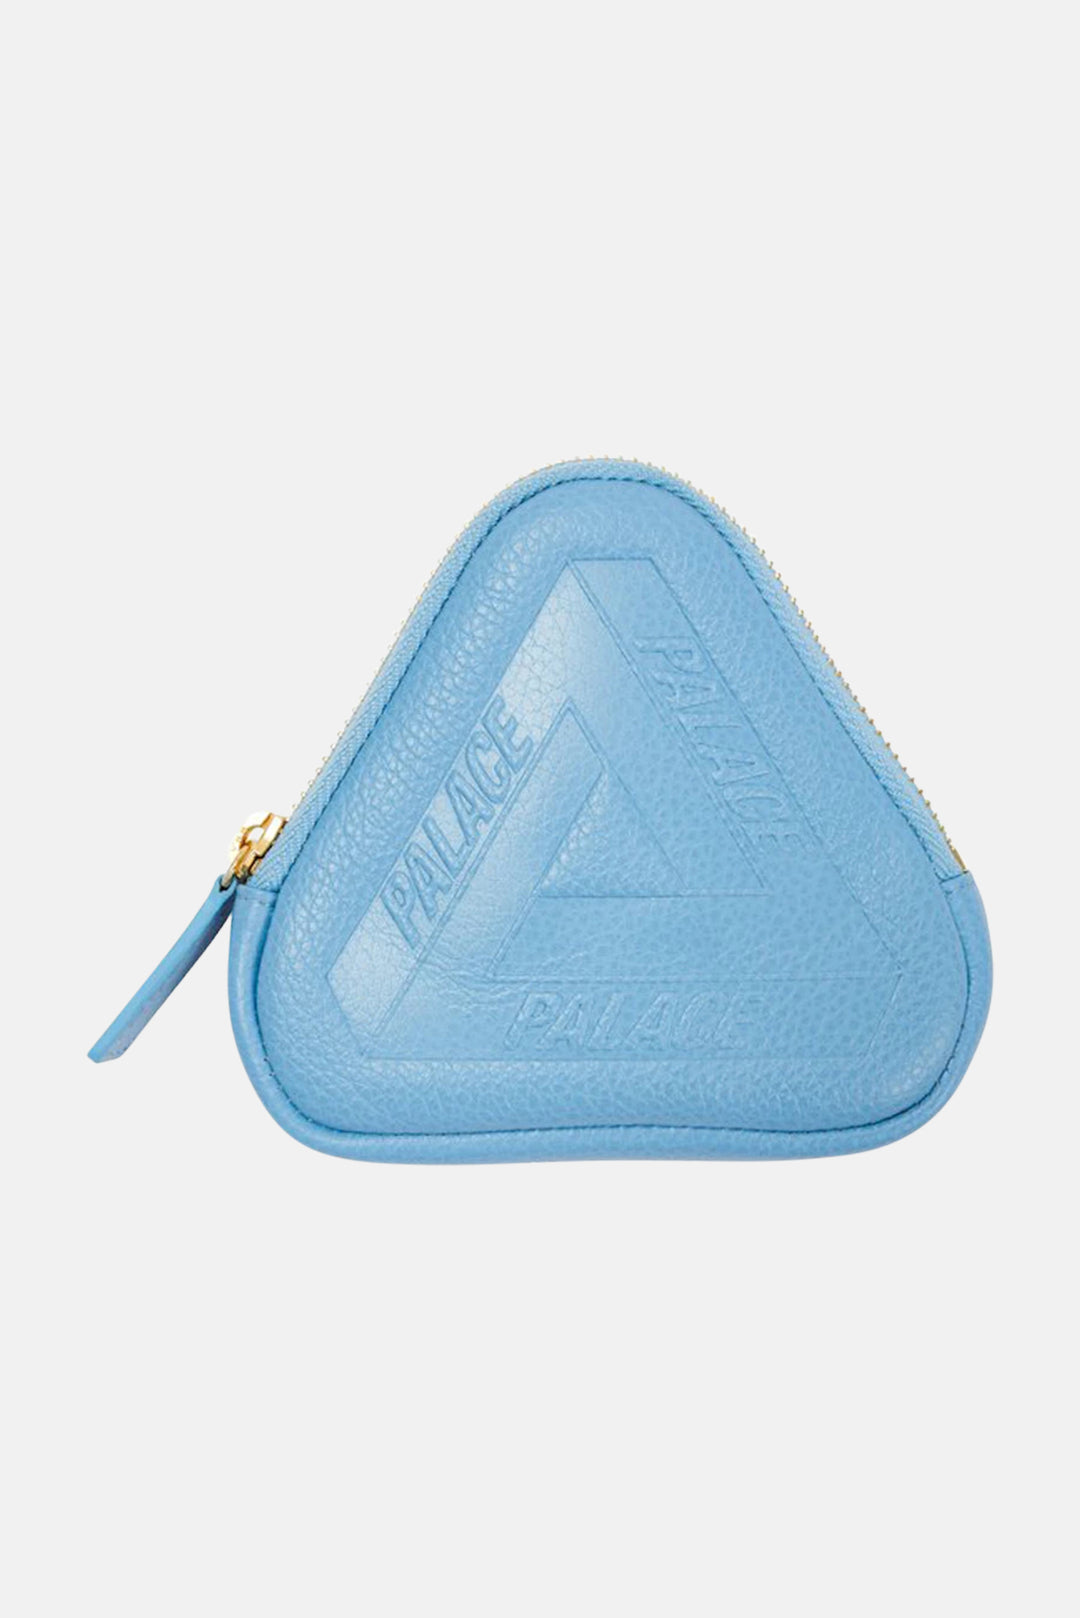 Palace leather coin wallet Blue